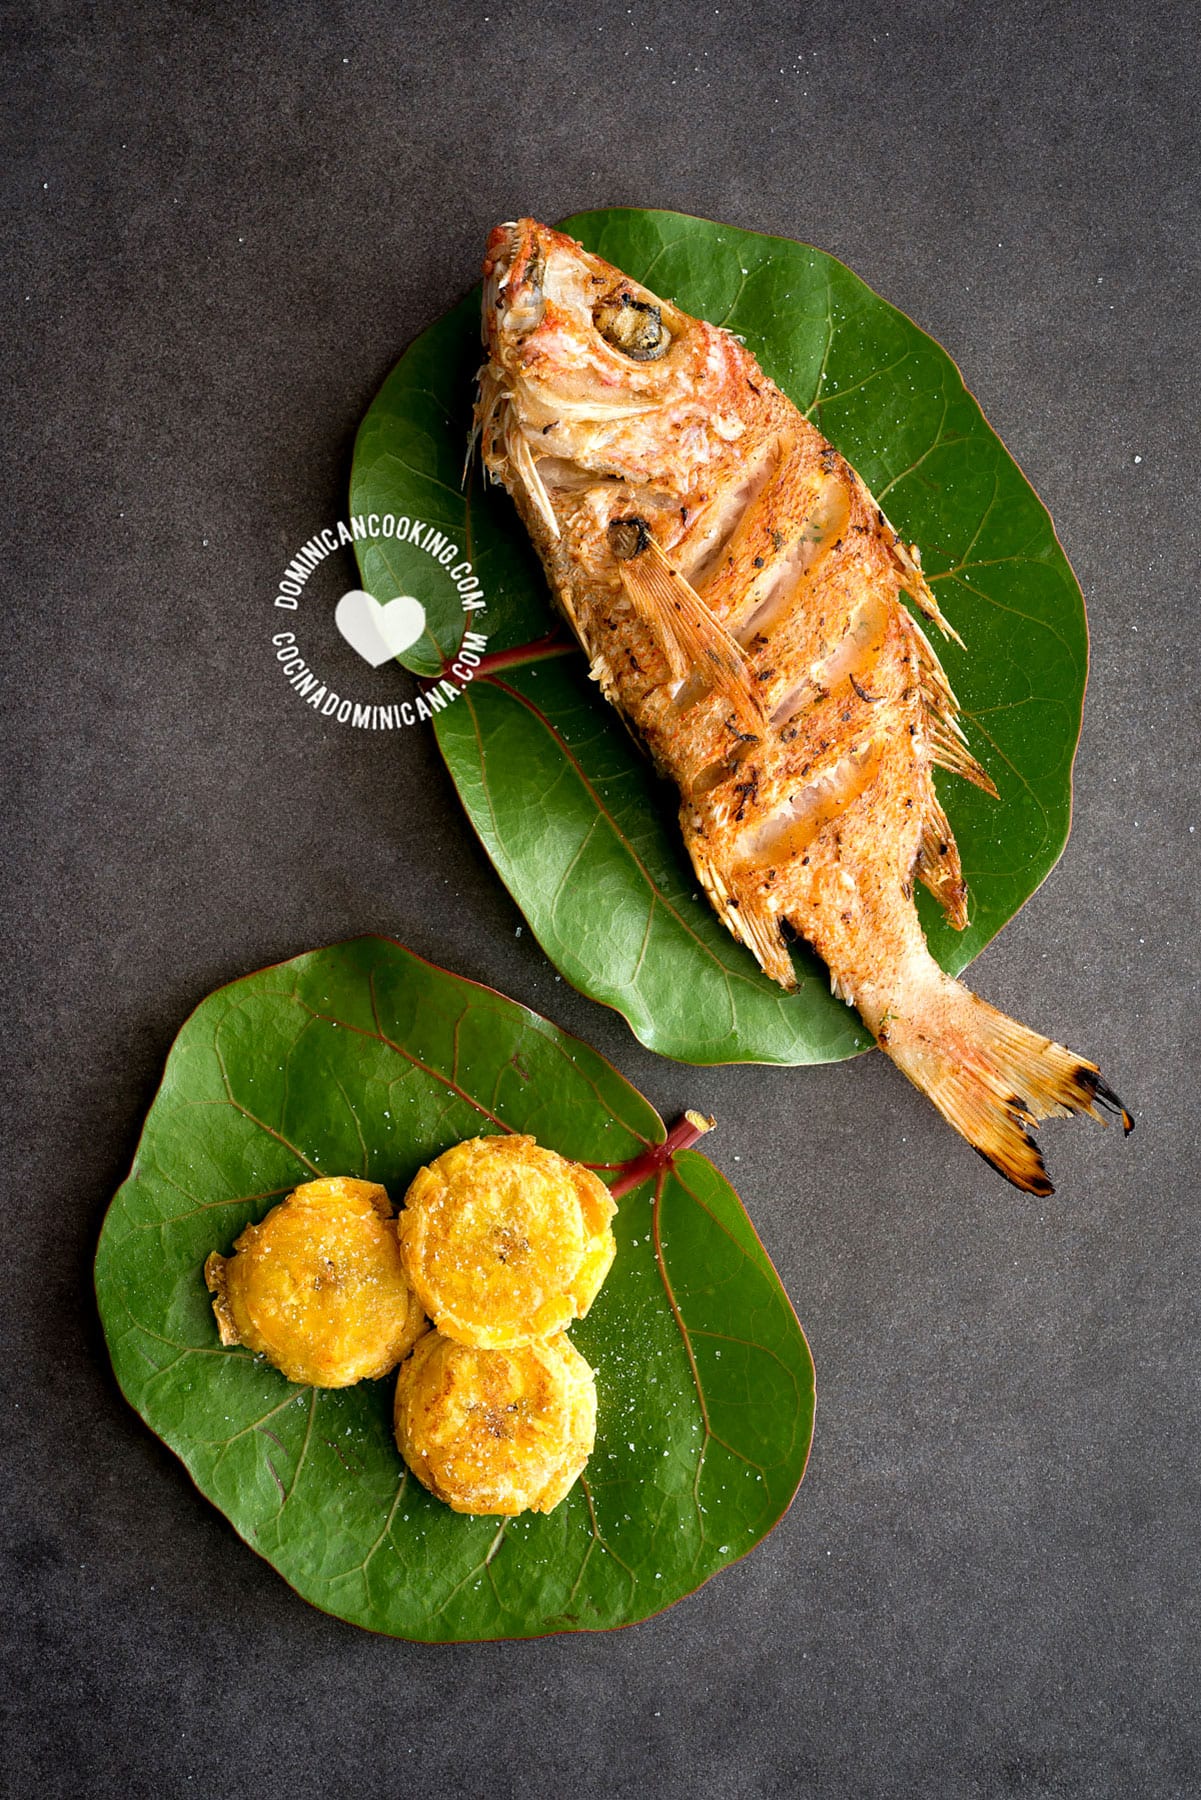 Fried fish with tostones.